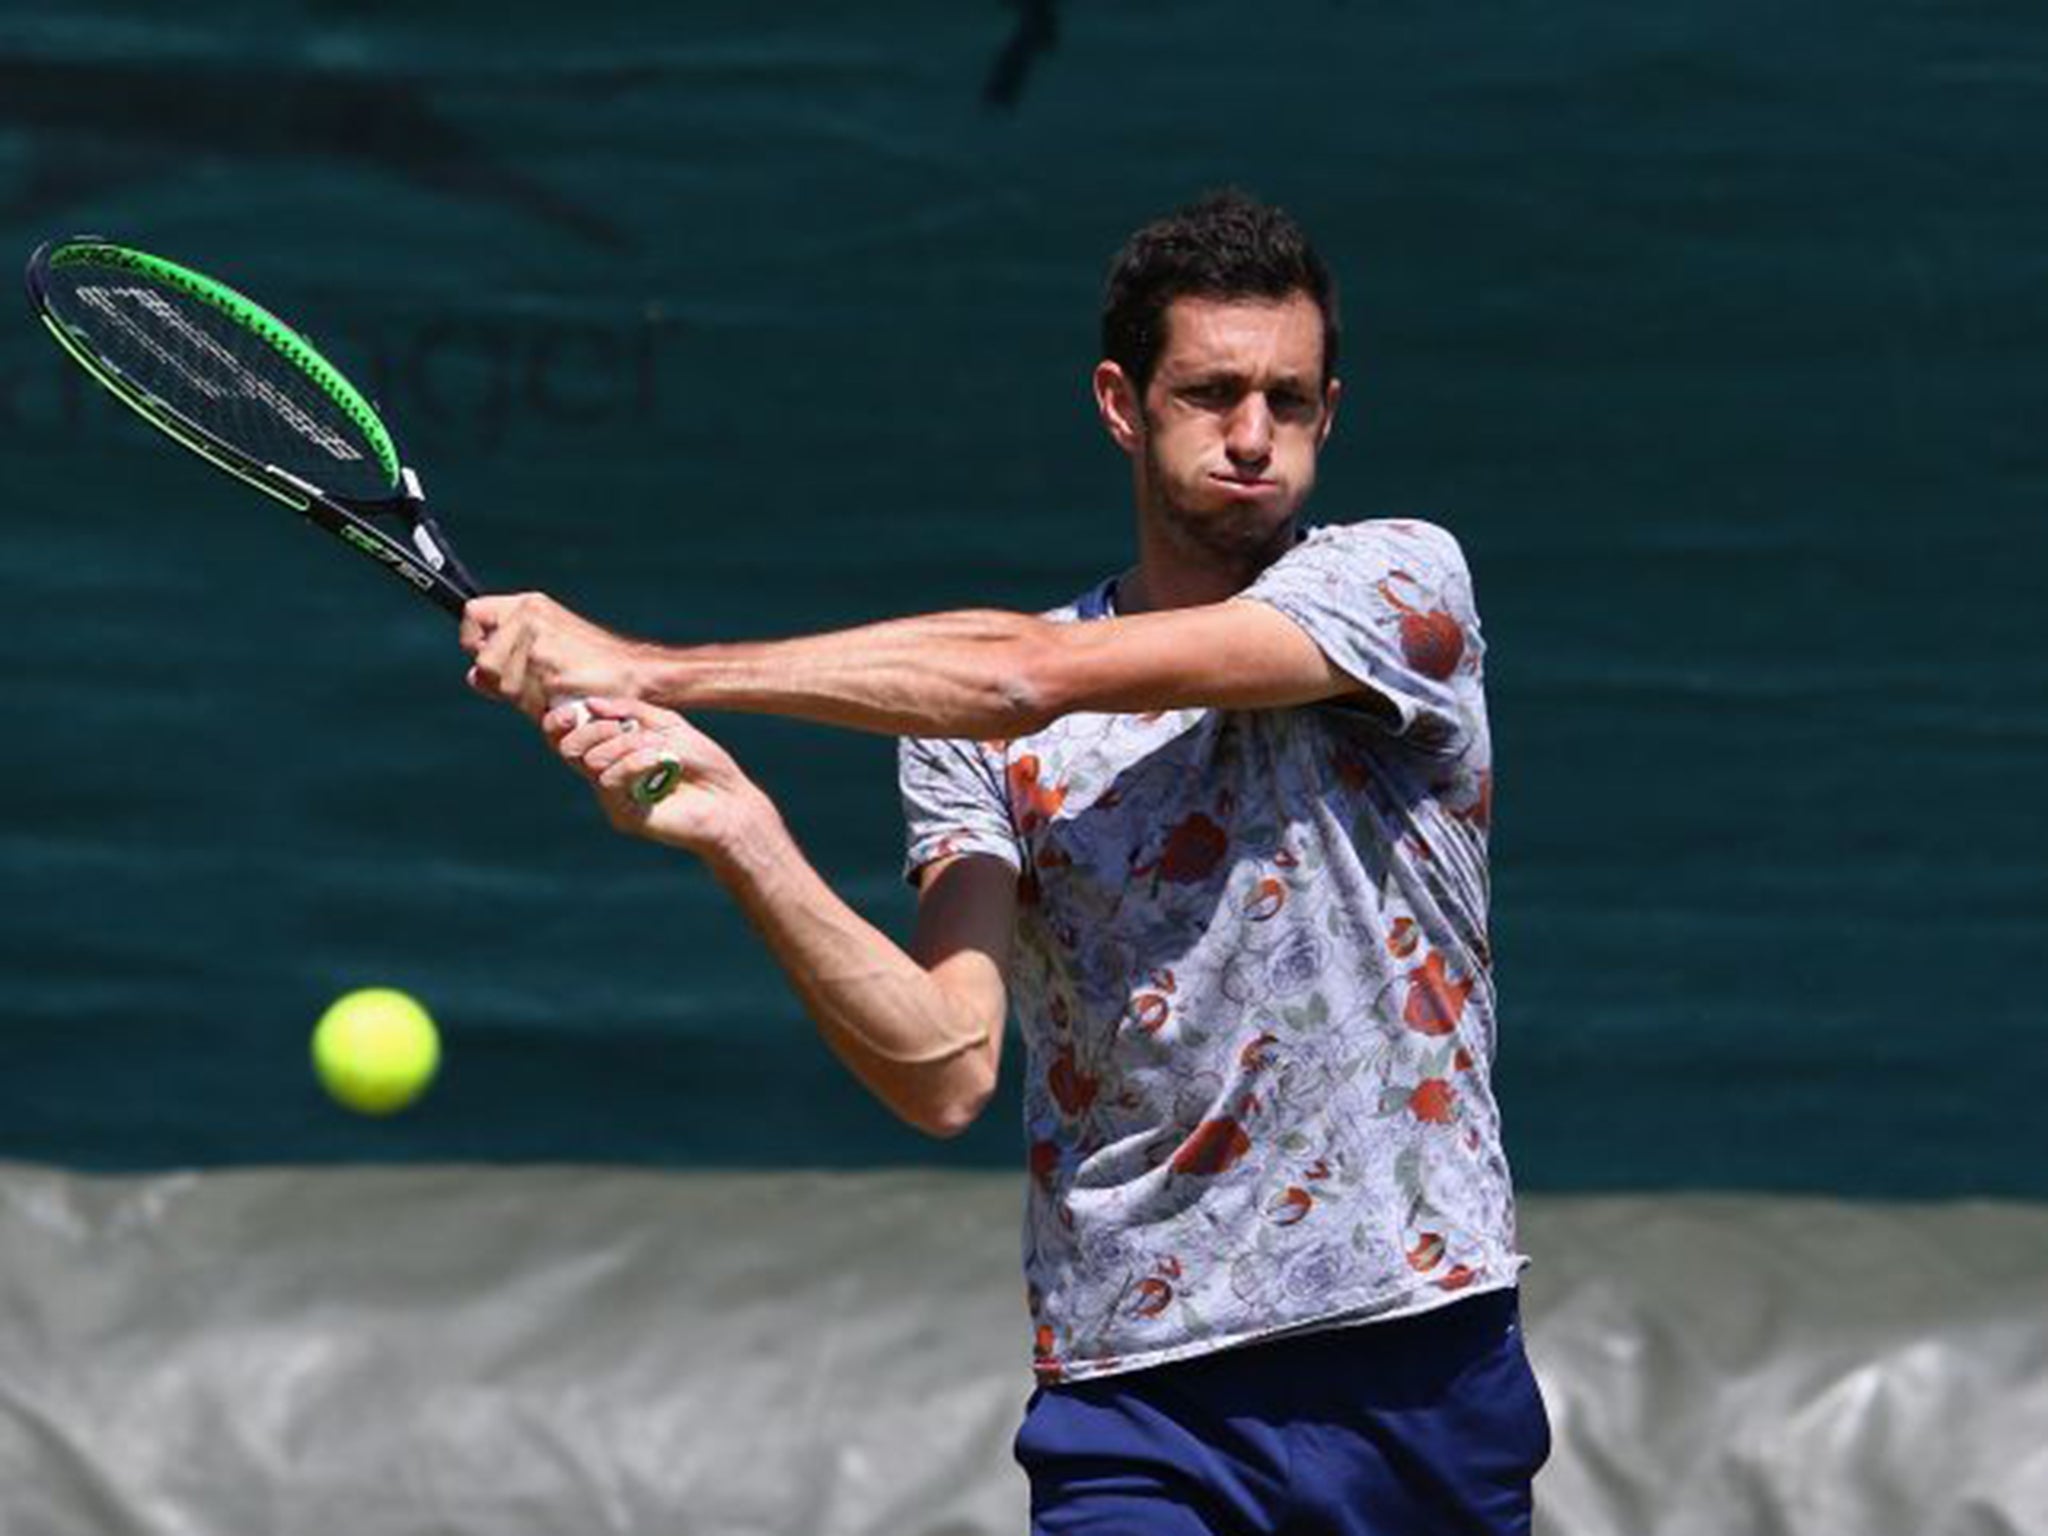 James Ward returns a shot during a practice session with Andy Murray on Friday